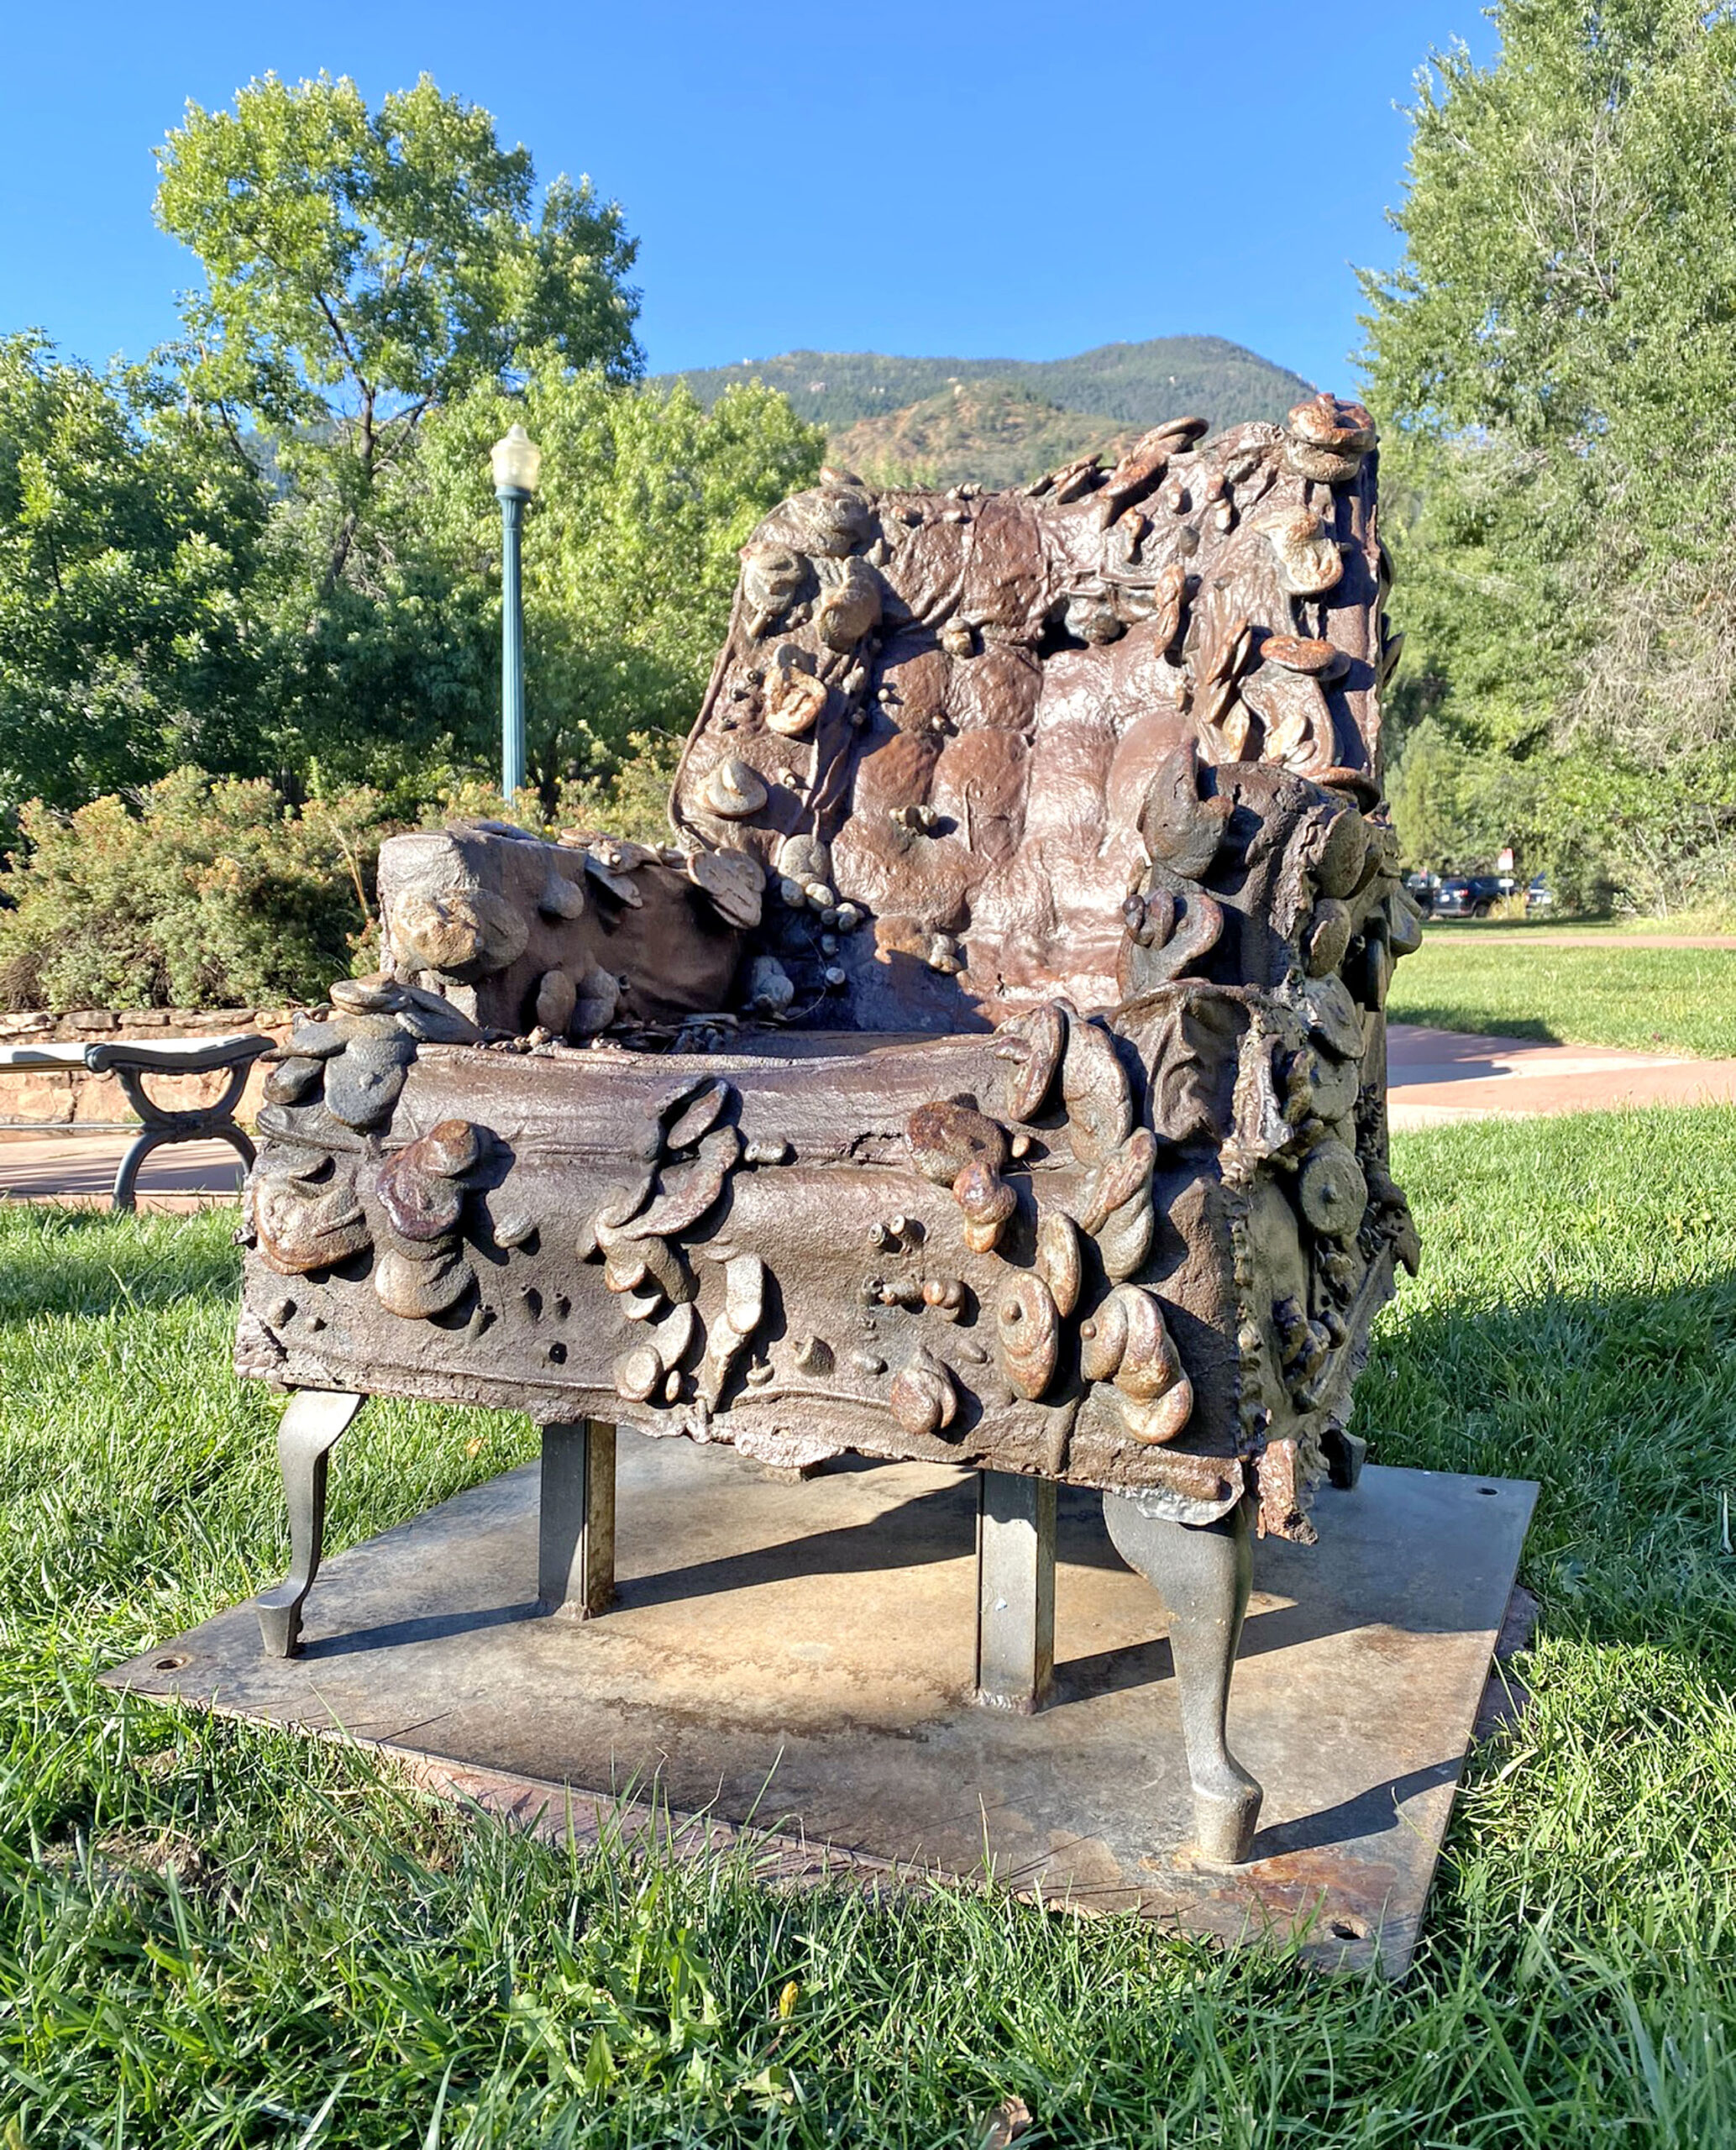 Courtesy images. “Revivification” by Zach Tabb is on display in 7 Minute Spring Park.